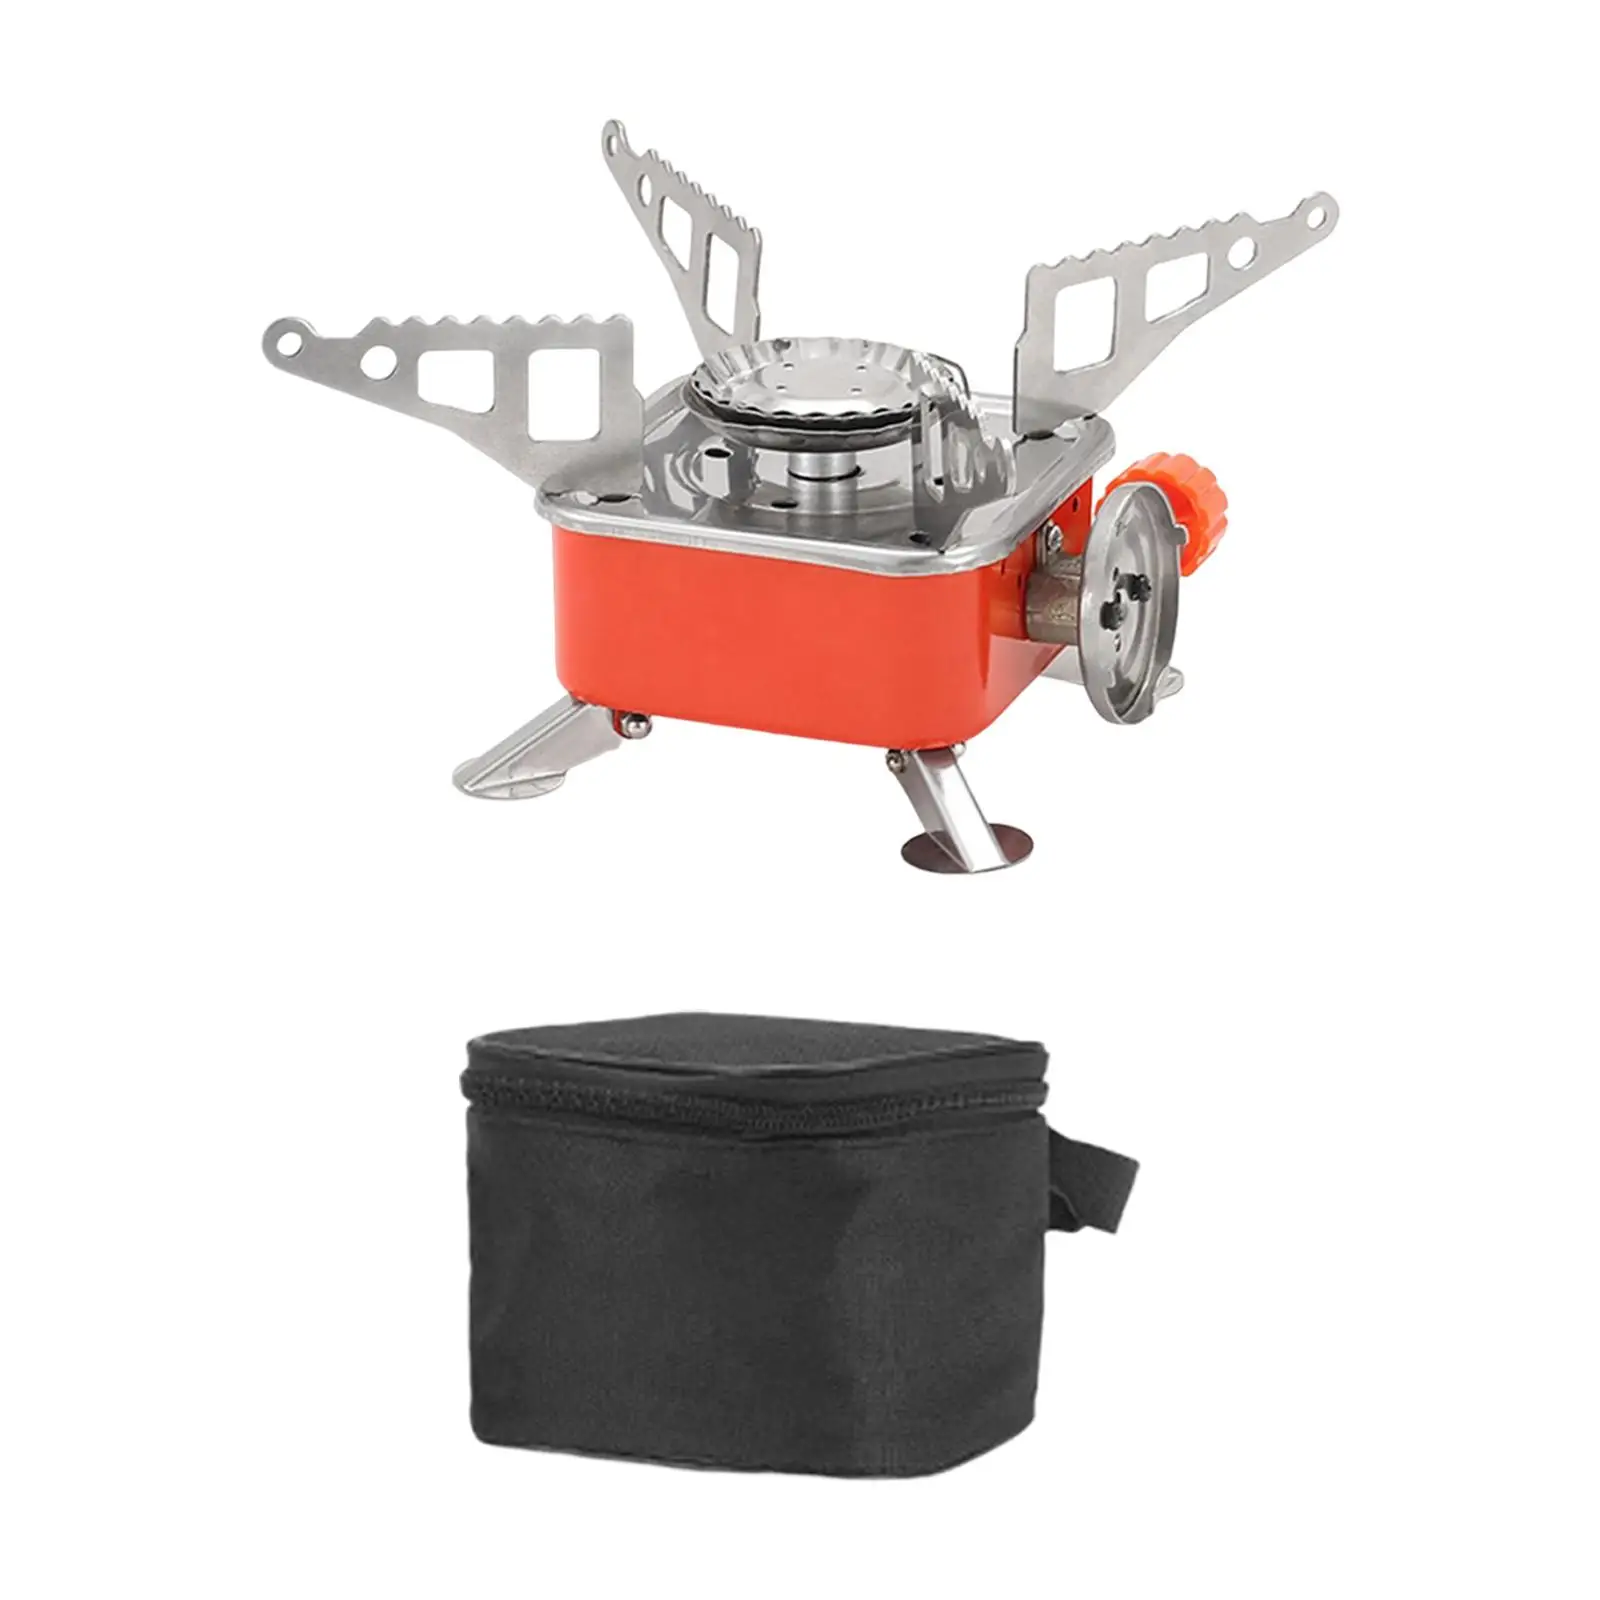 Portable Camping Gas Stove with Piezo Ignition Foldable Ultralight Stove Burner Camp Stove for Fishing Outdoor Backpacking